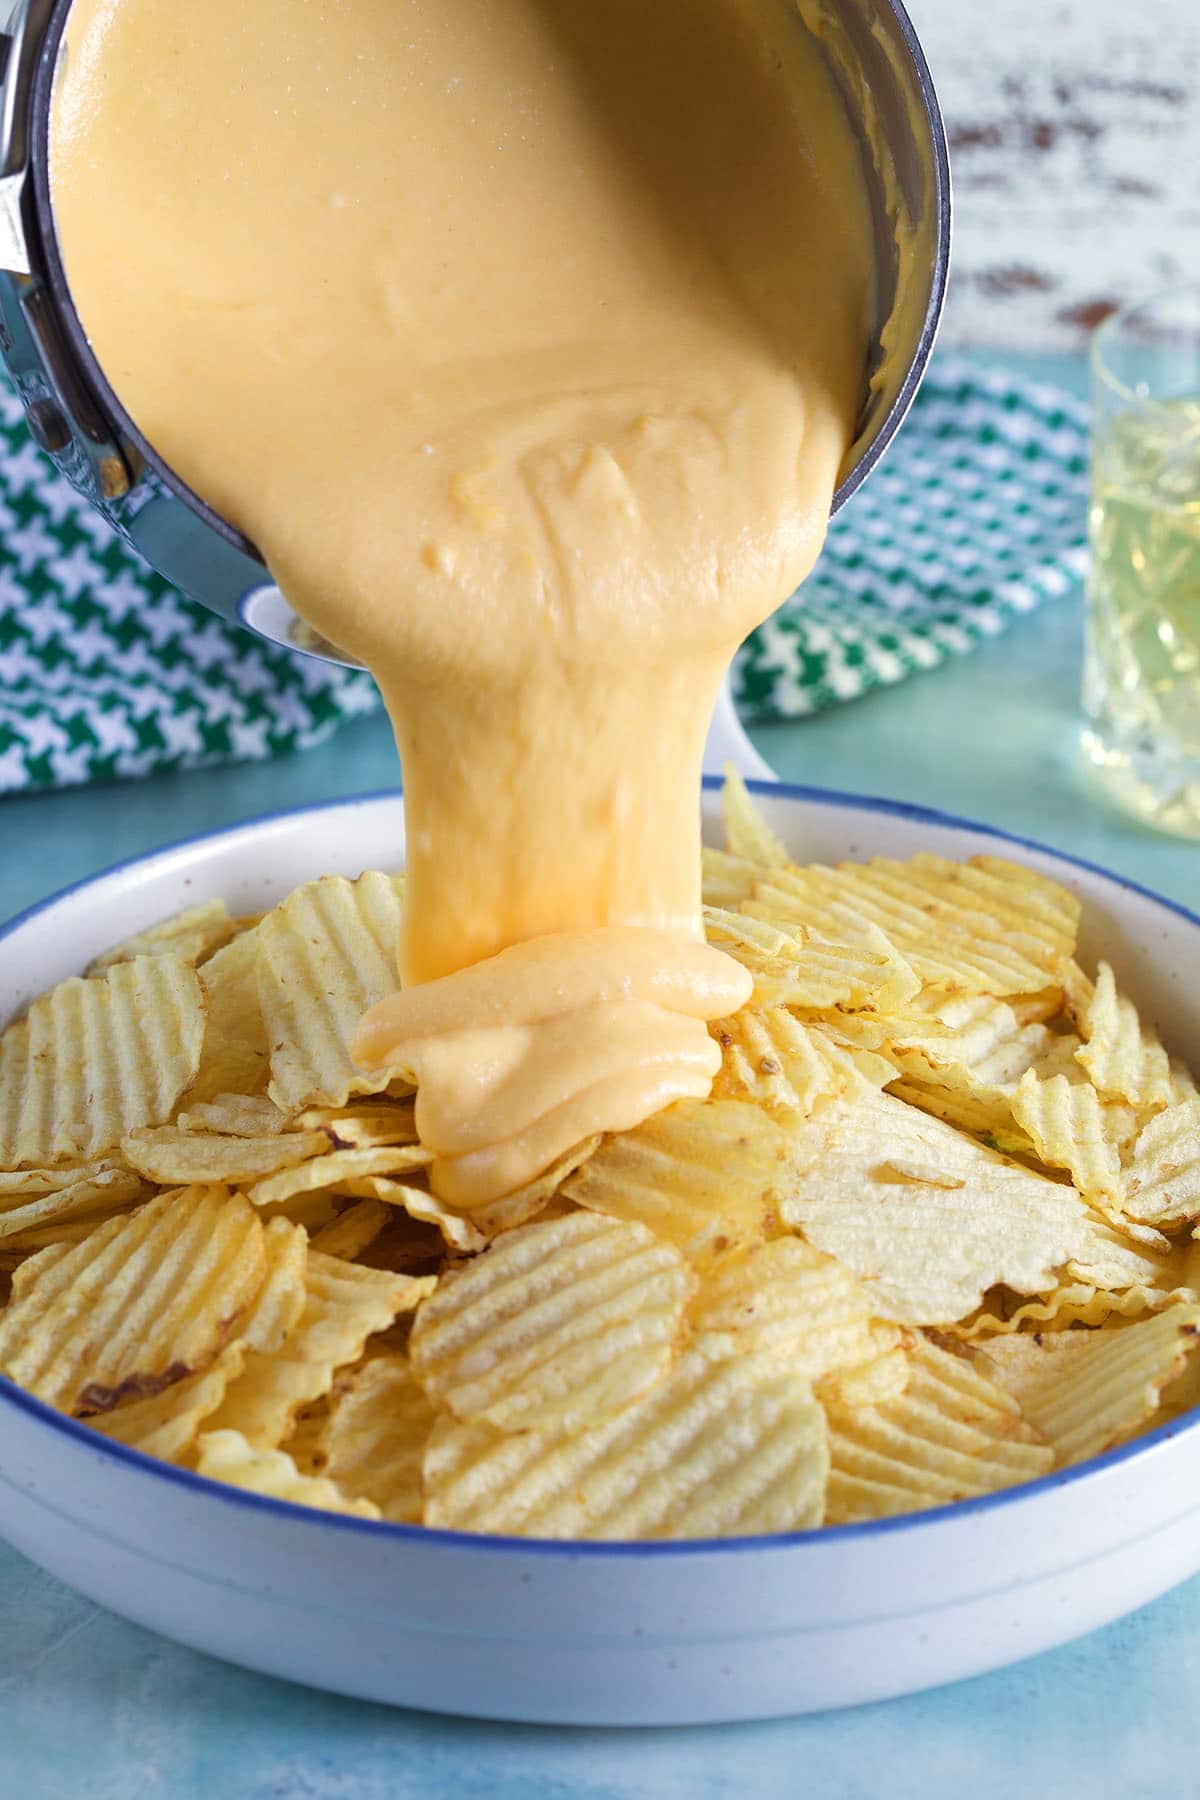 Beer cheese sauce is being poured on to potato chips.